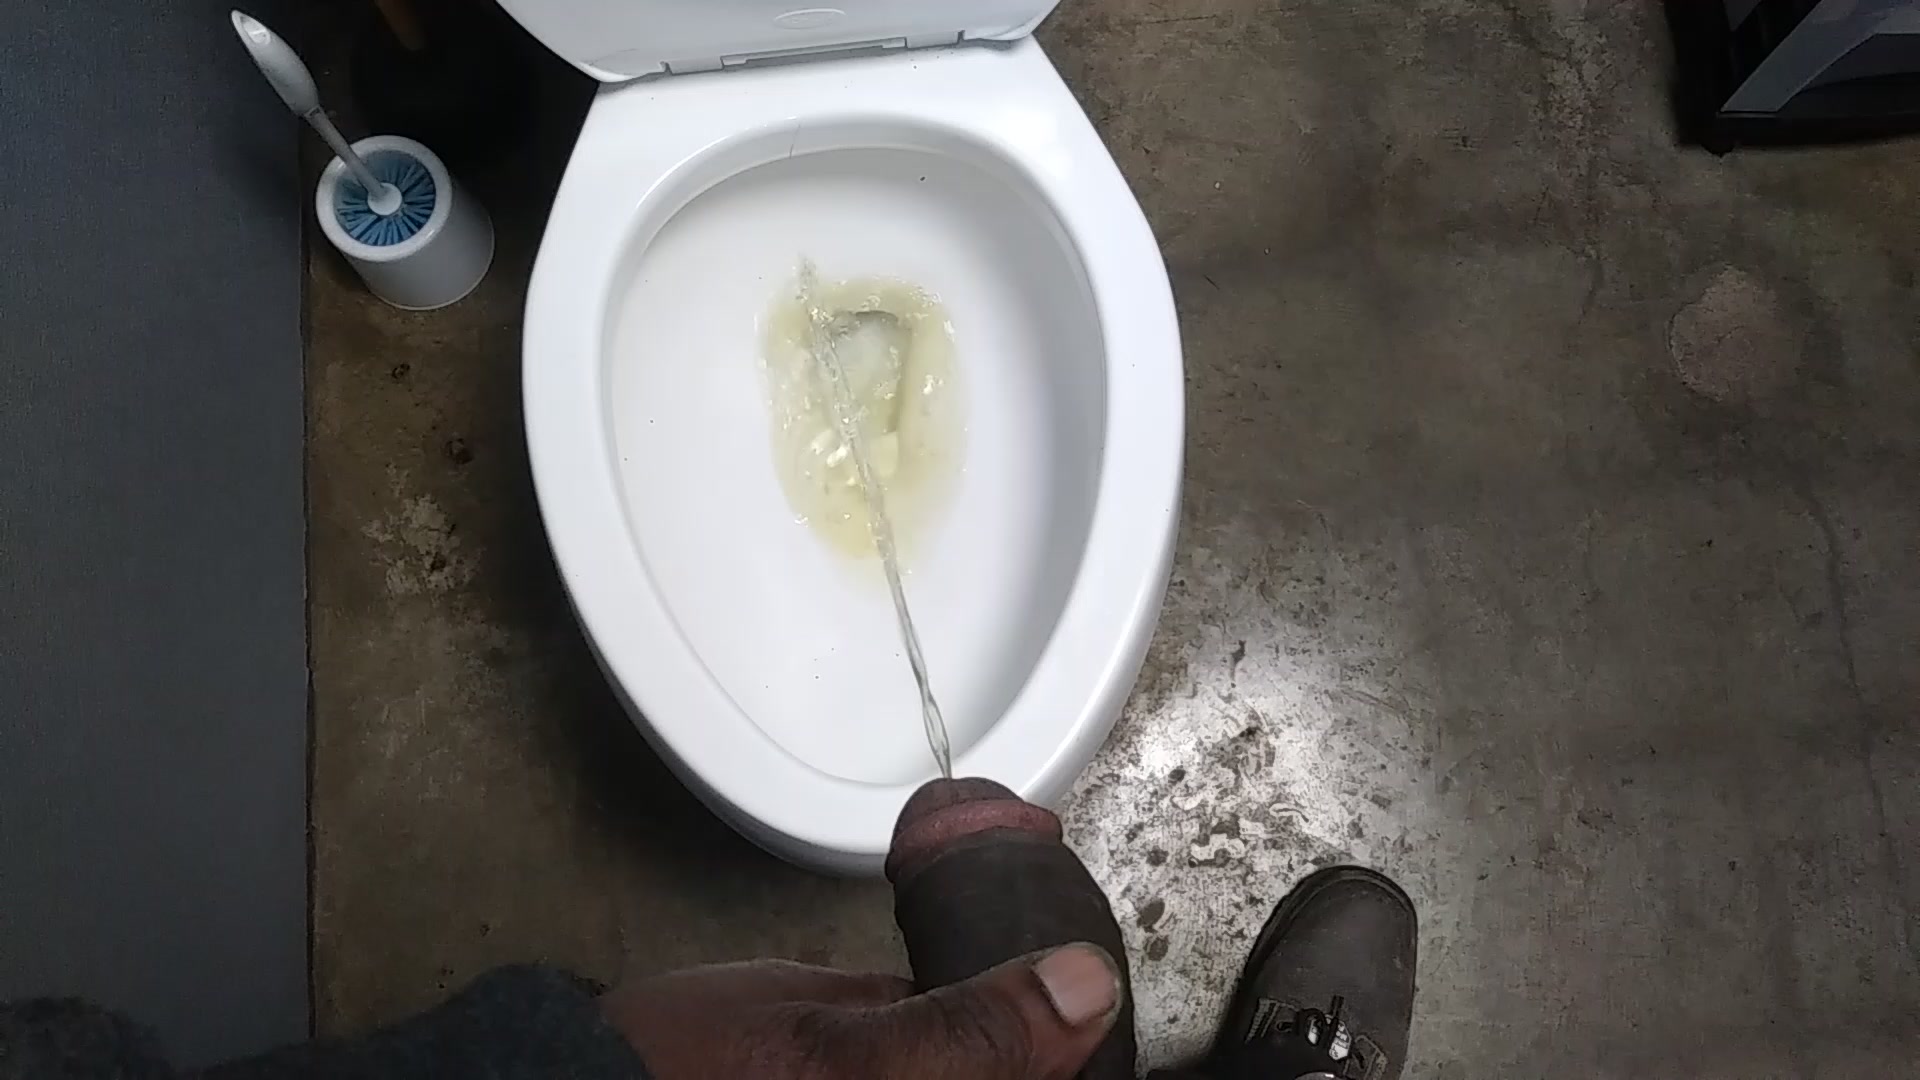 At work piss